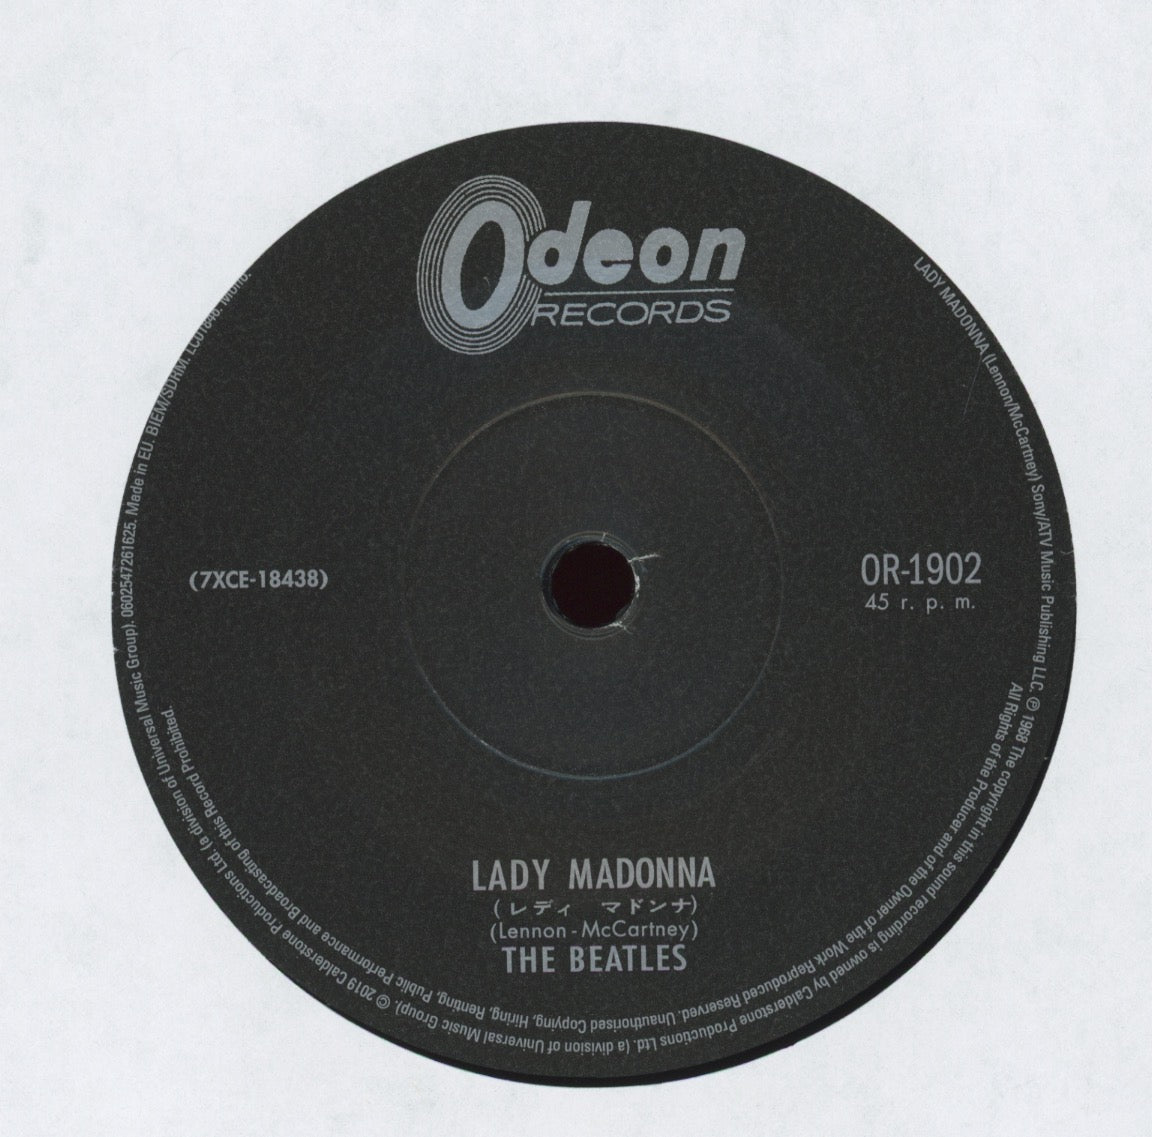 The Beatles - Lady Madonna / The Inner Light on Odeon 7" Reissue With Picture Cover